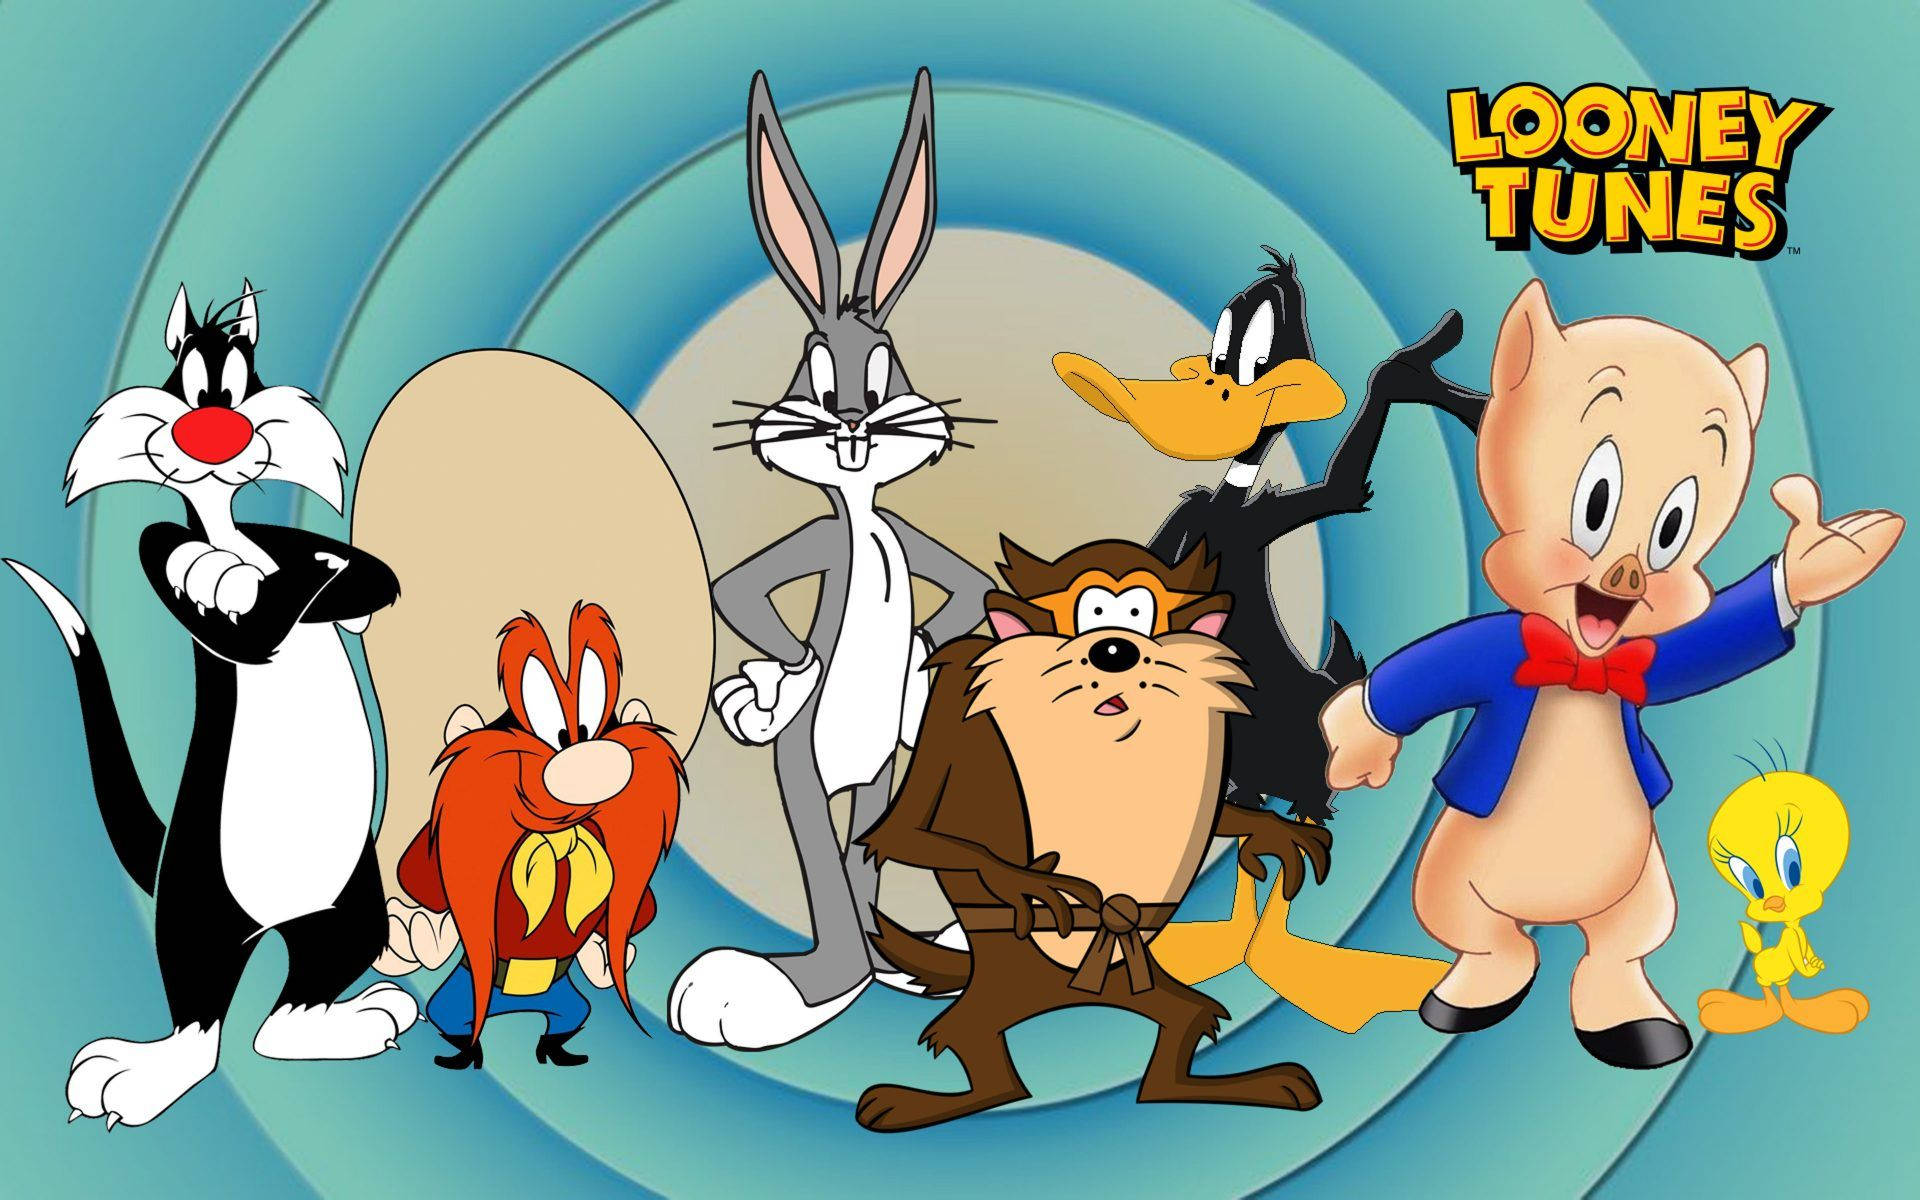 Porky Pig And Looney Tunes Cartoon Characters Background